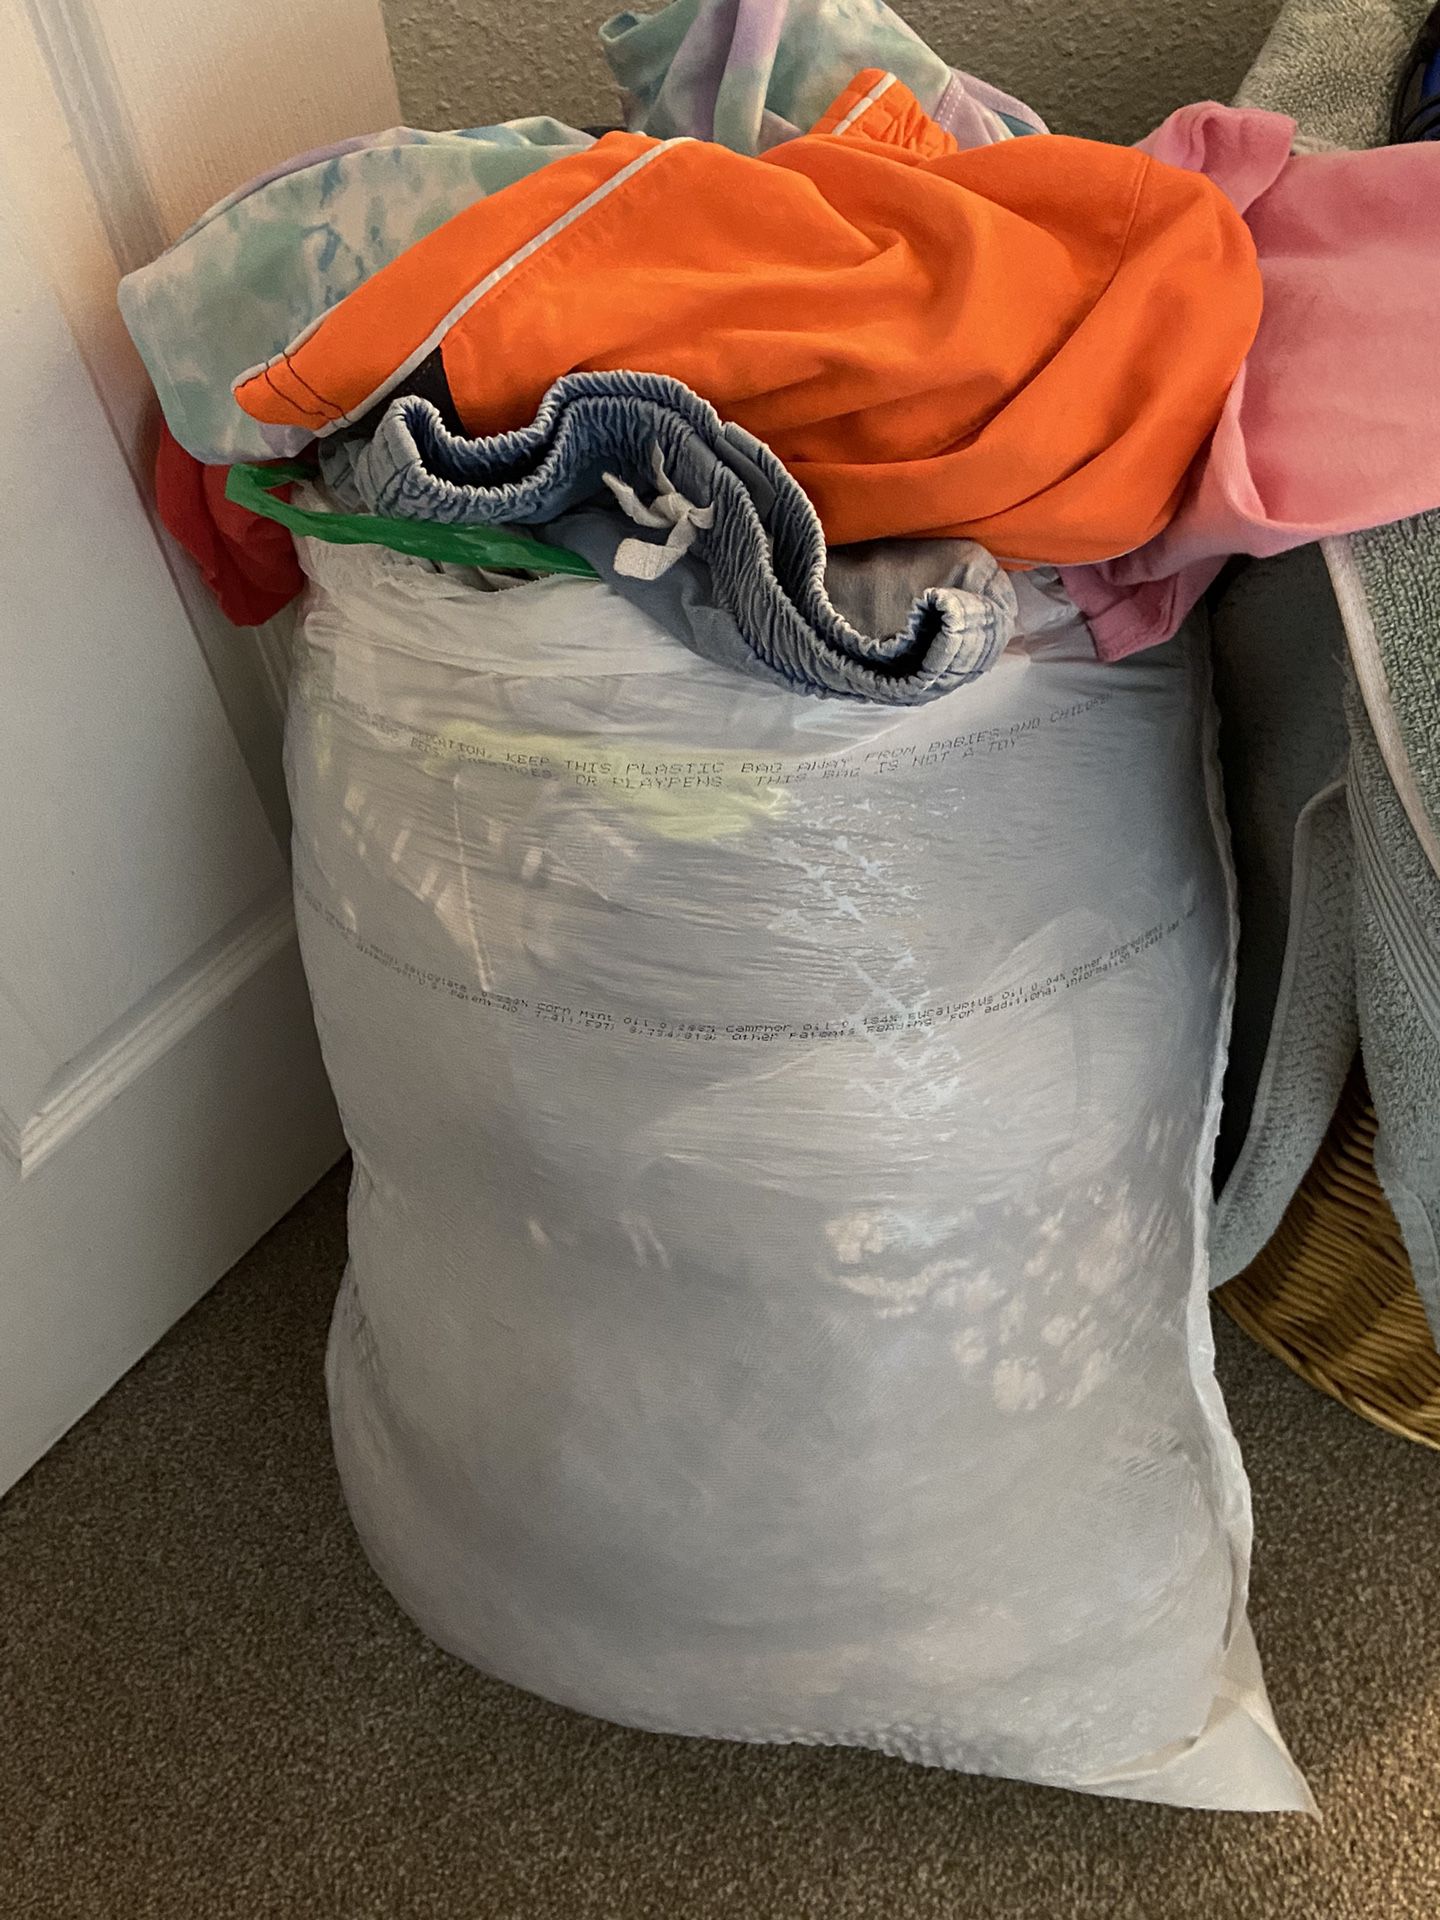 Bag Of Clothing 